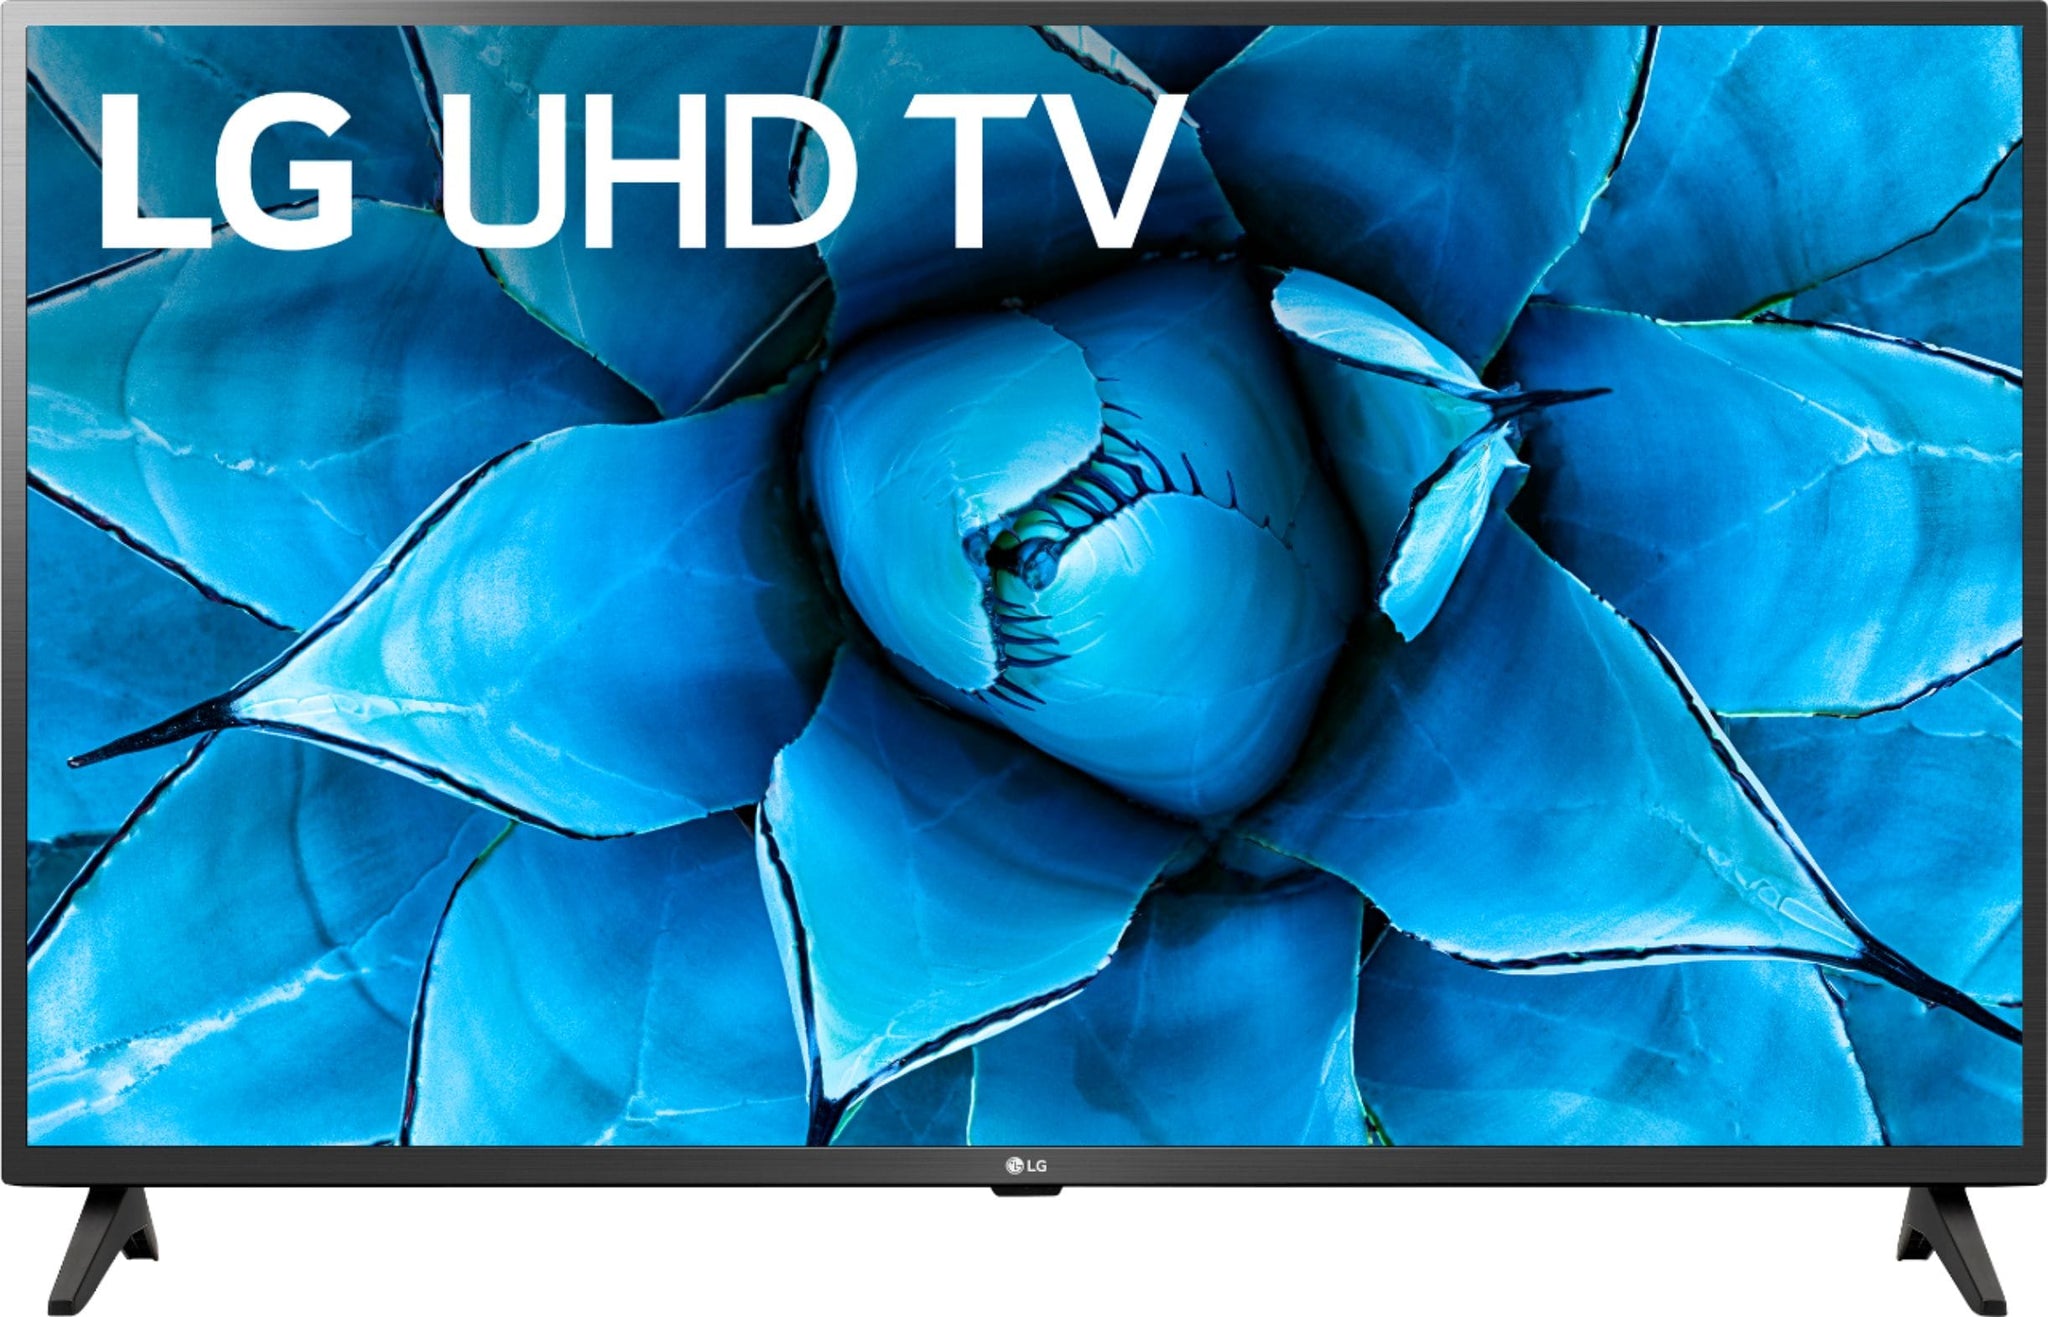 LG 43" Class 4K Smart UHD TV with AI ThinQ(Refurbished) Tv's ONLY for delivery in San Diego and Tijuana